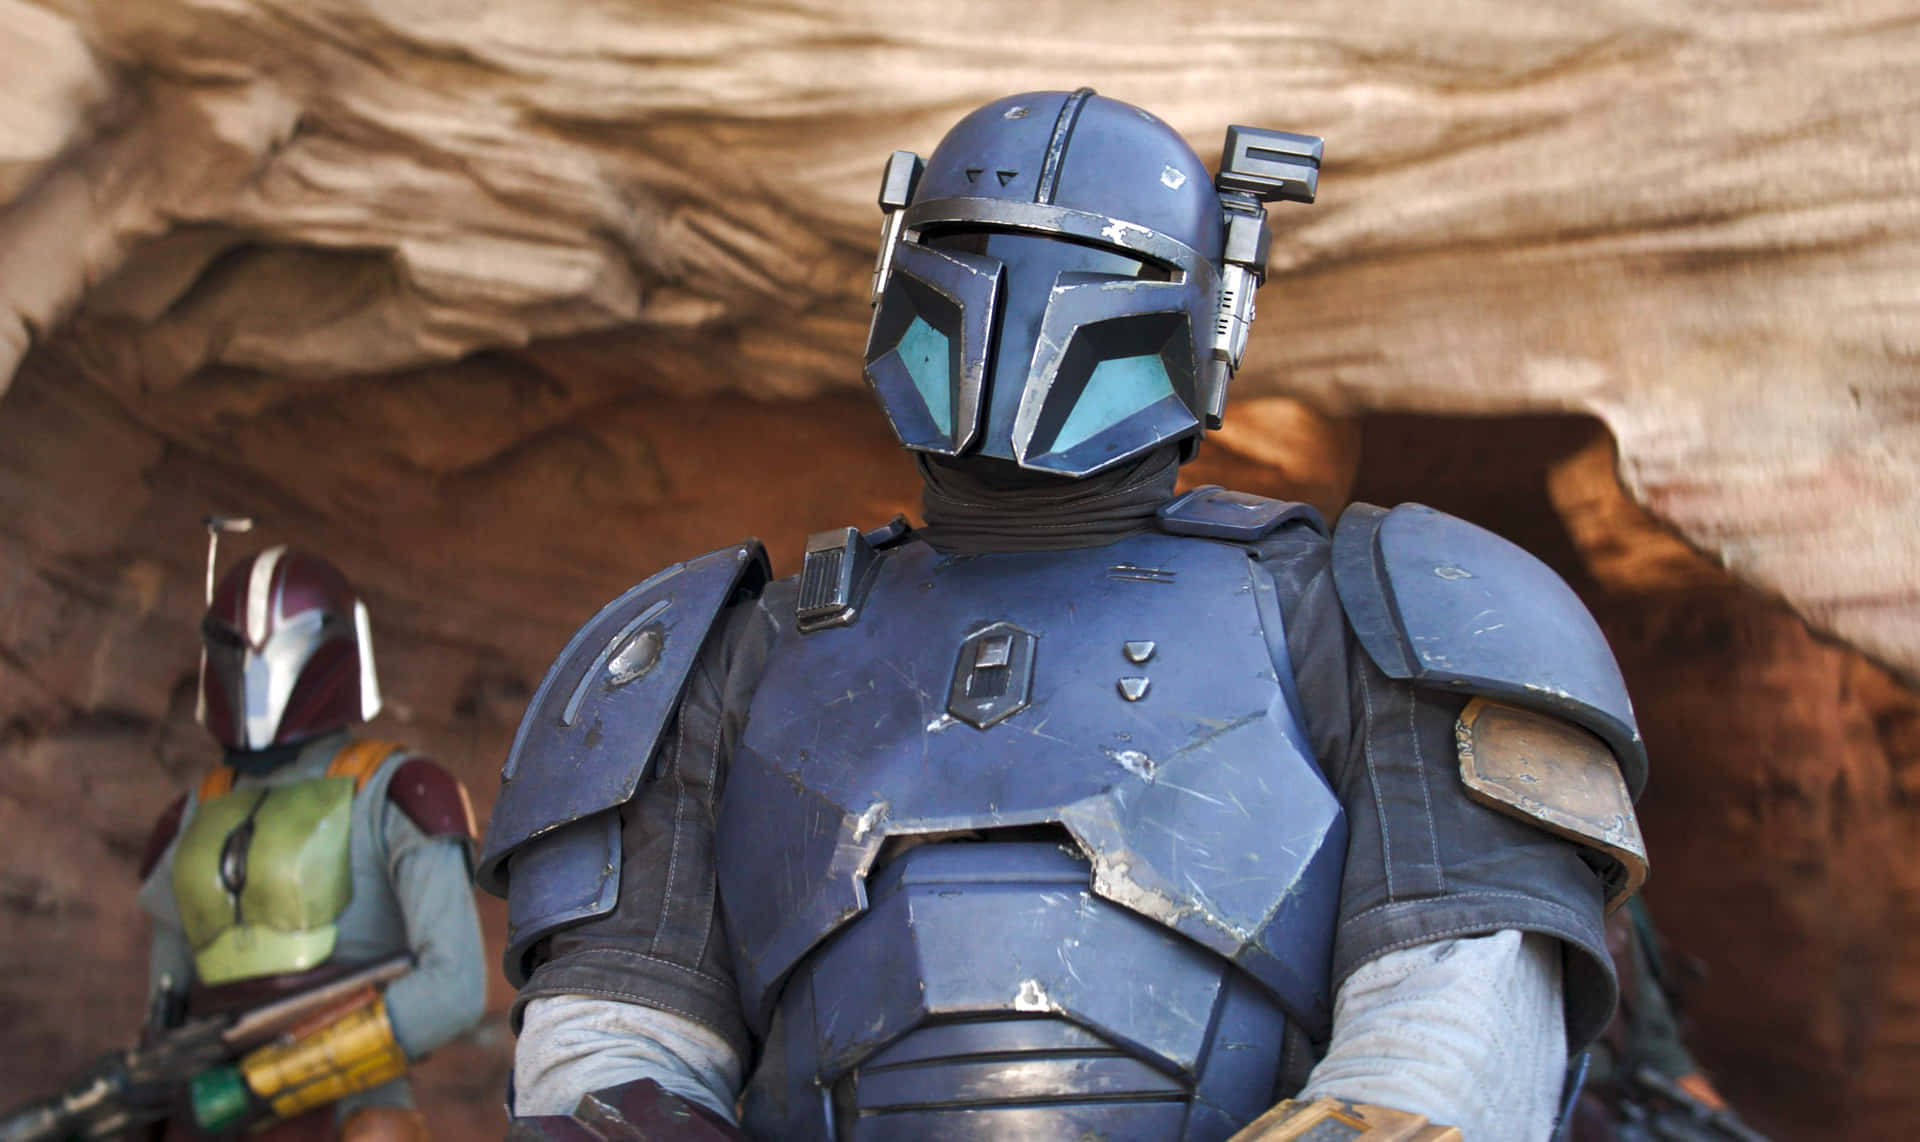 Star Wars Mandalorian - A New Look At The Clone Troopers